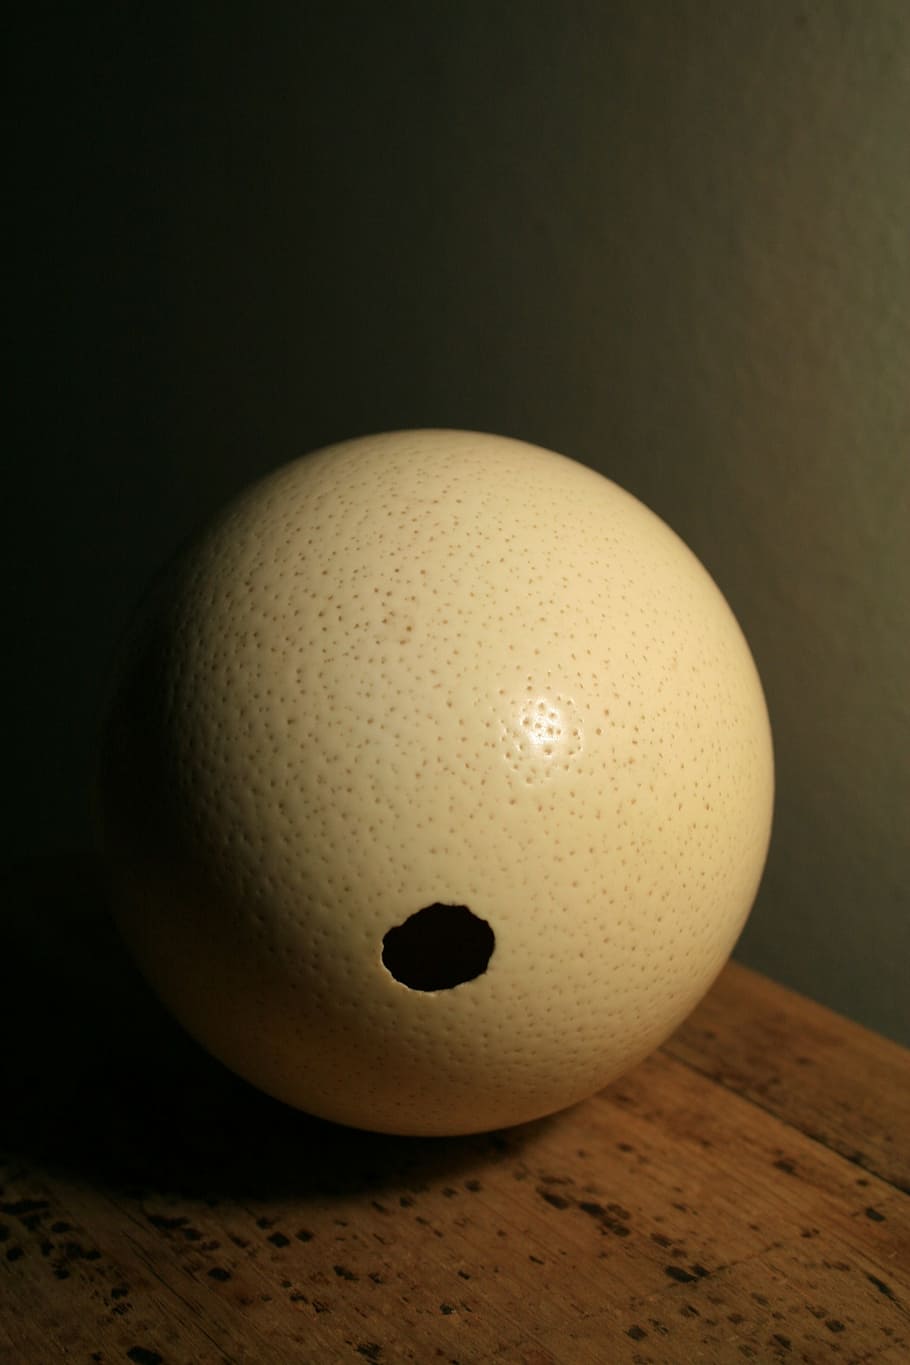 ostrich egg, shell, egg, ostrich, buff, dimpled, strong, opening, indoors, close-up